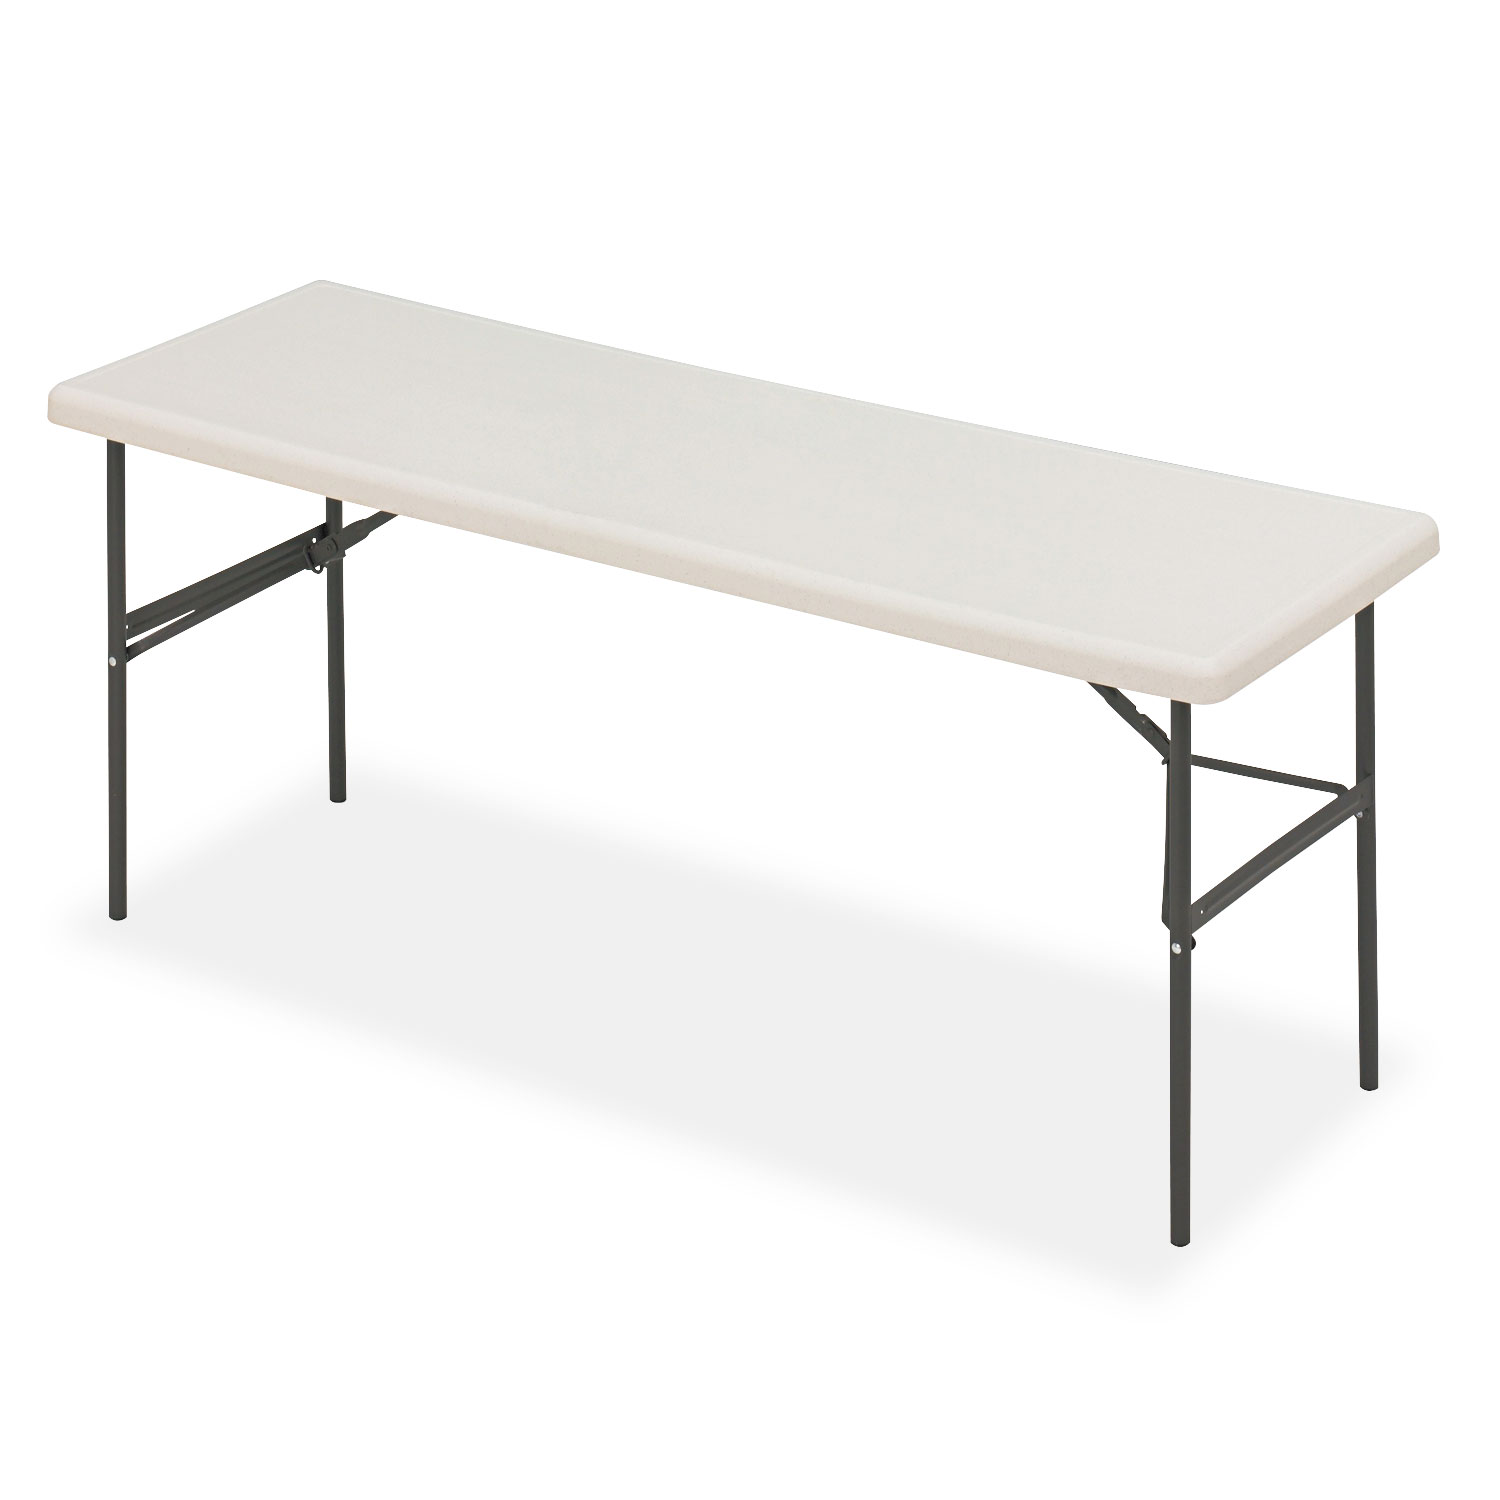  Iceberg 65383 IndestrucTables Too 1200 Series Folding Table, 72w x 24d x 29h, Platinum (ICE65383) 